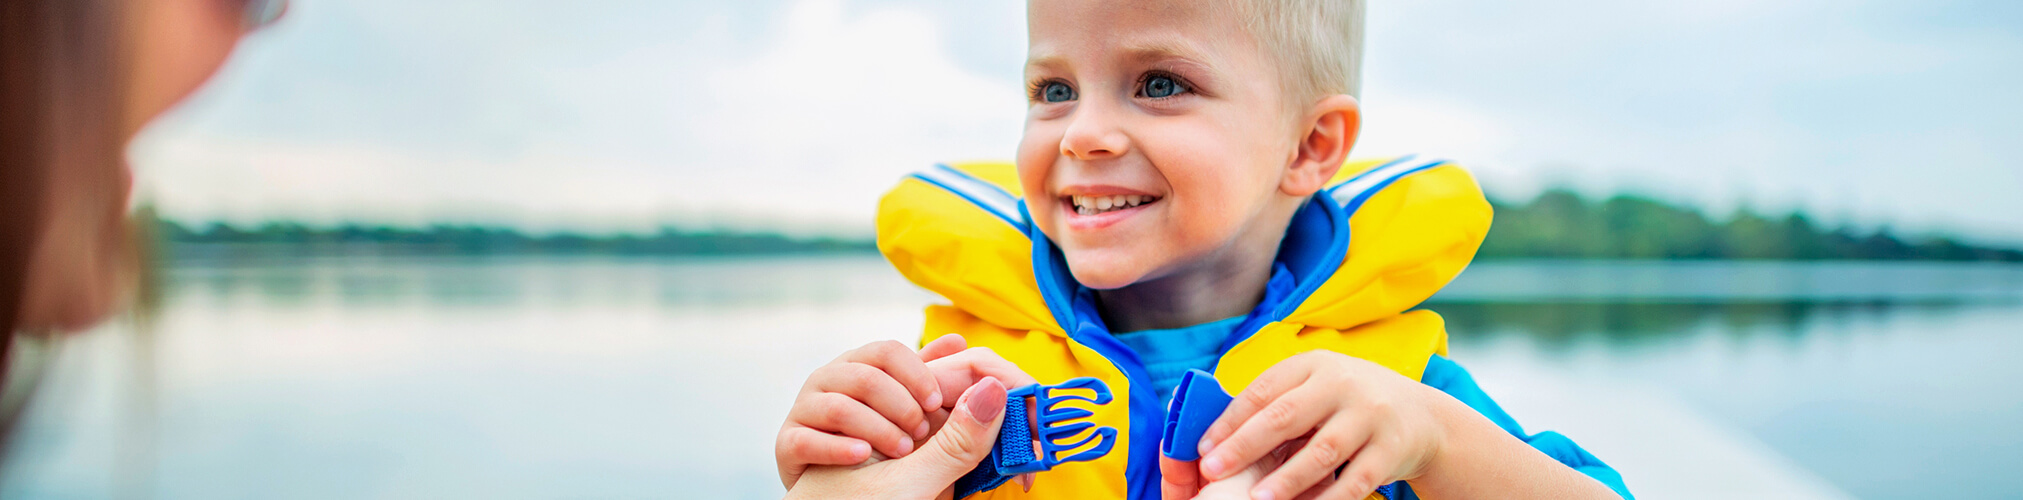 Drowning Prevention for Curious Toddlers: What Parents Need to Know ...